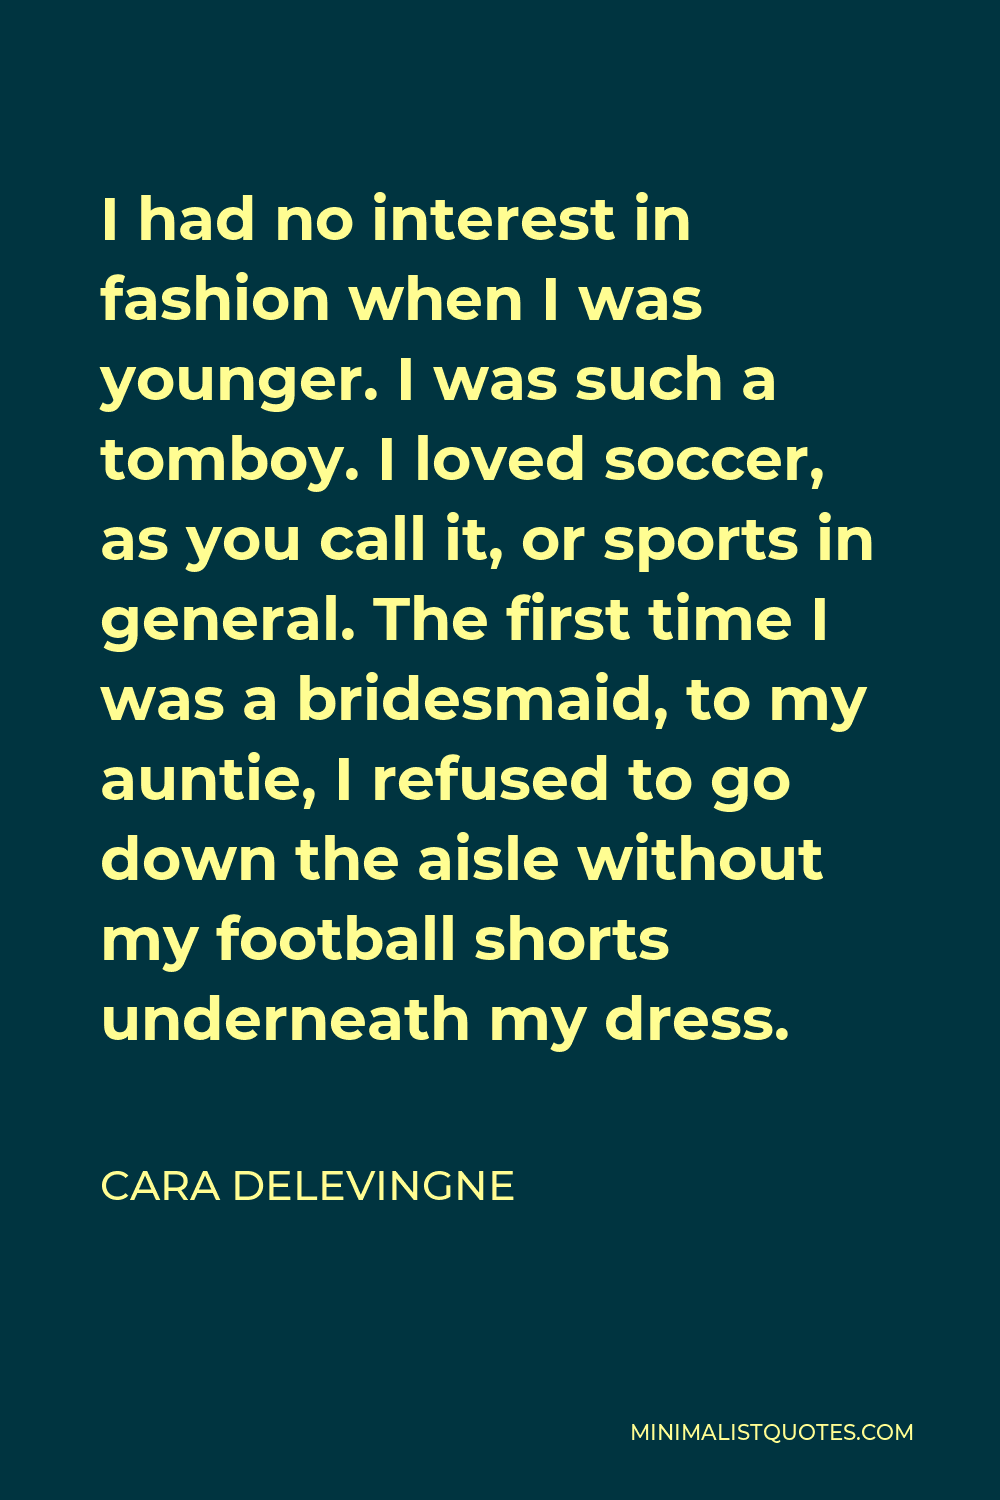 Cara Delevingne Quote - I had no interest in fashion when I was younger. I was such a tomboy. I loved soccer, as you call it, or sports in general. The first time I was a bridesmaid, to my auntie, I refused to go down the aisle without my football shorts underneath my dress.